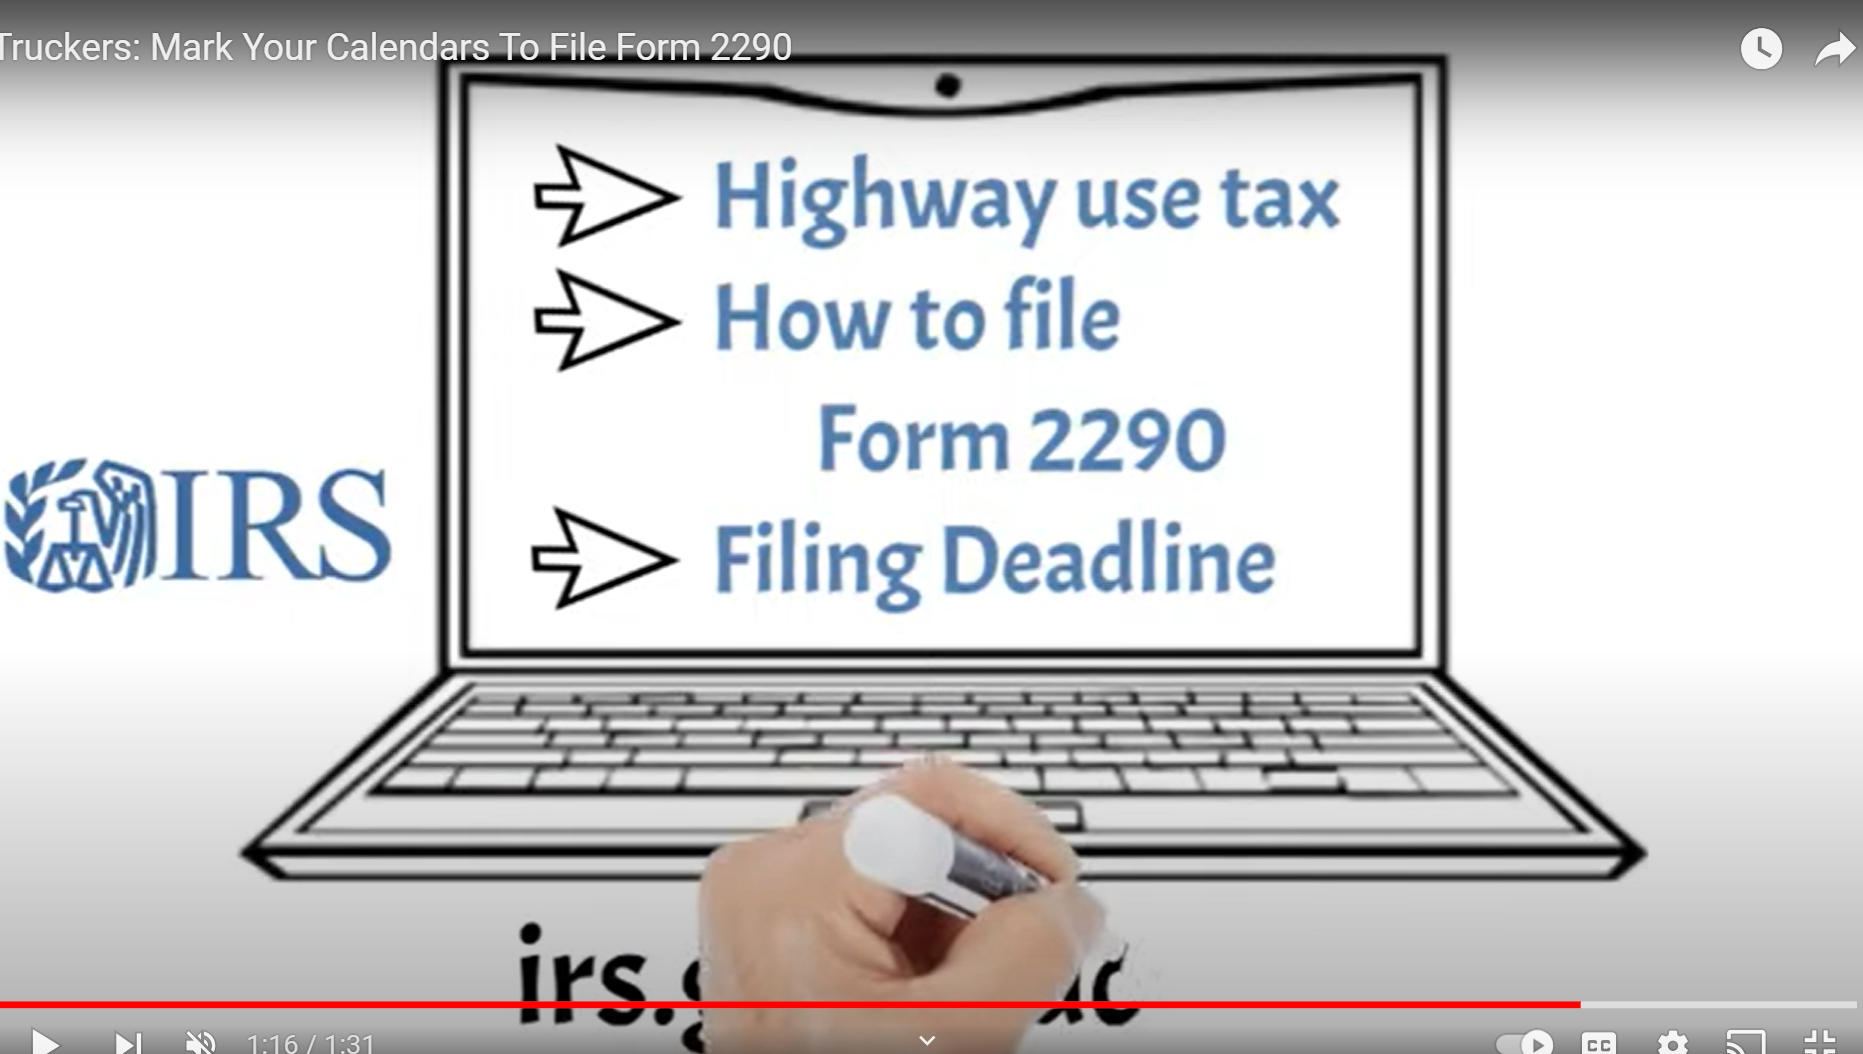 You own a heavy highway vehicle and need to file Form 2290